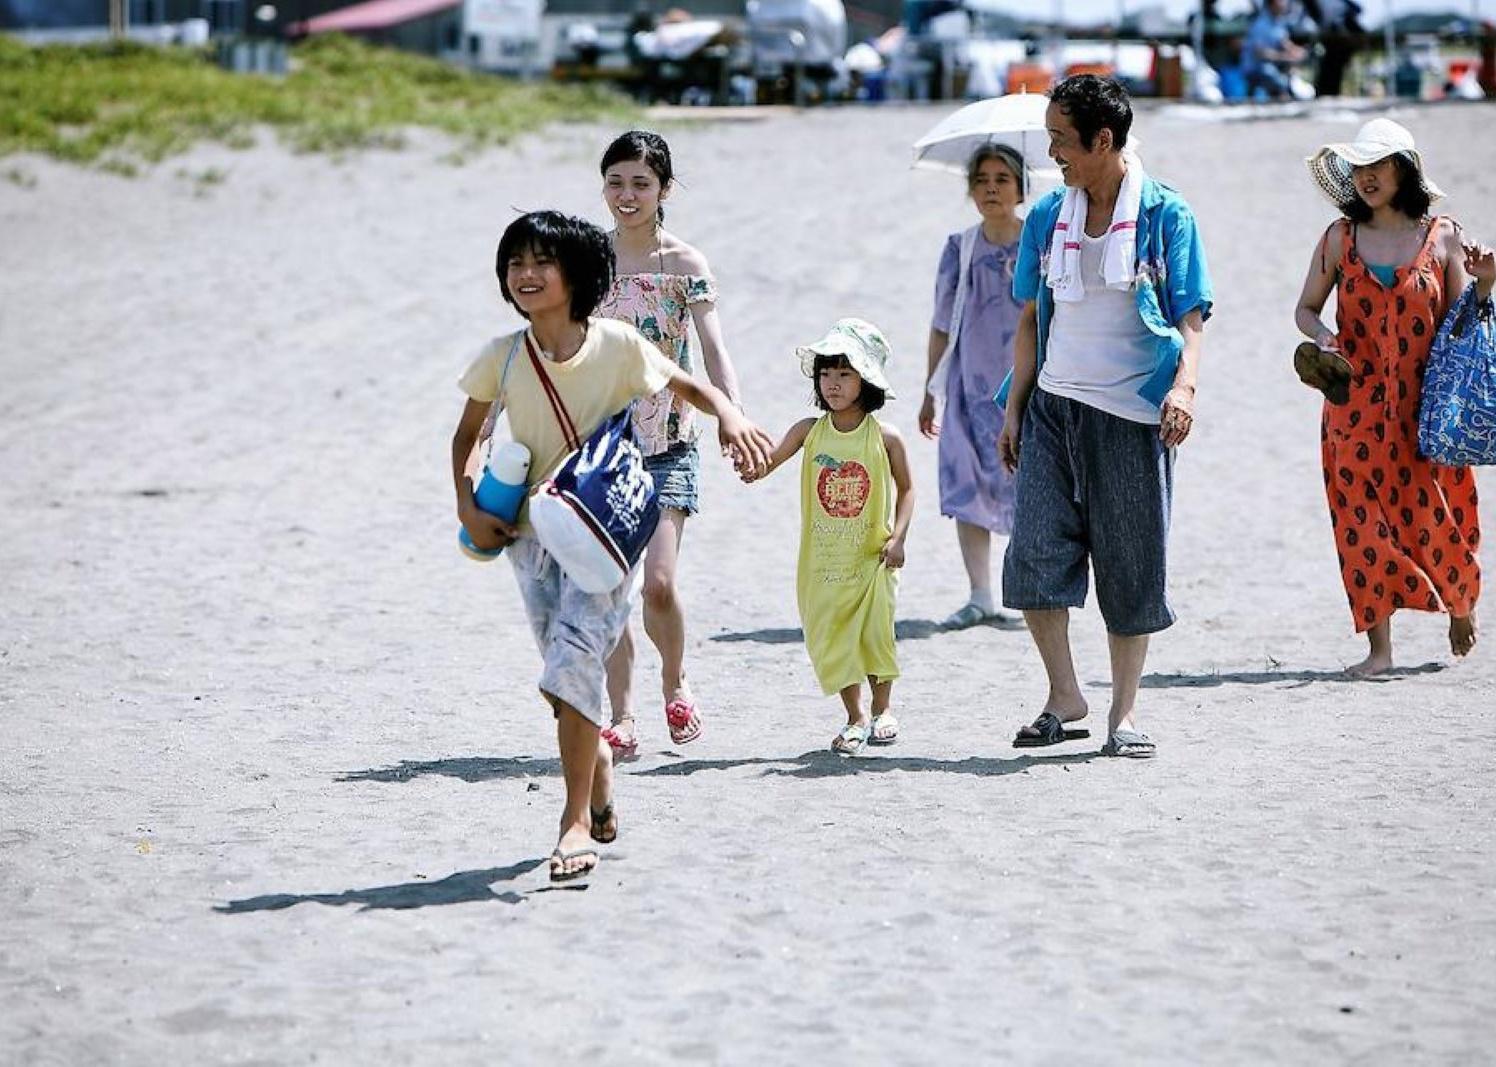 A family of kids and adults walks on the beach.